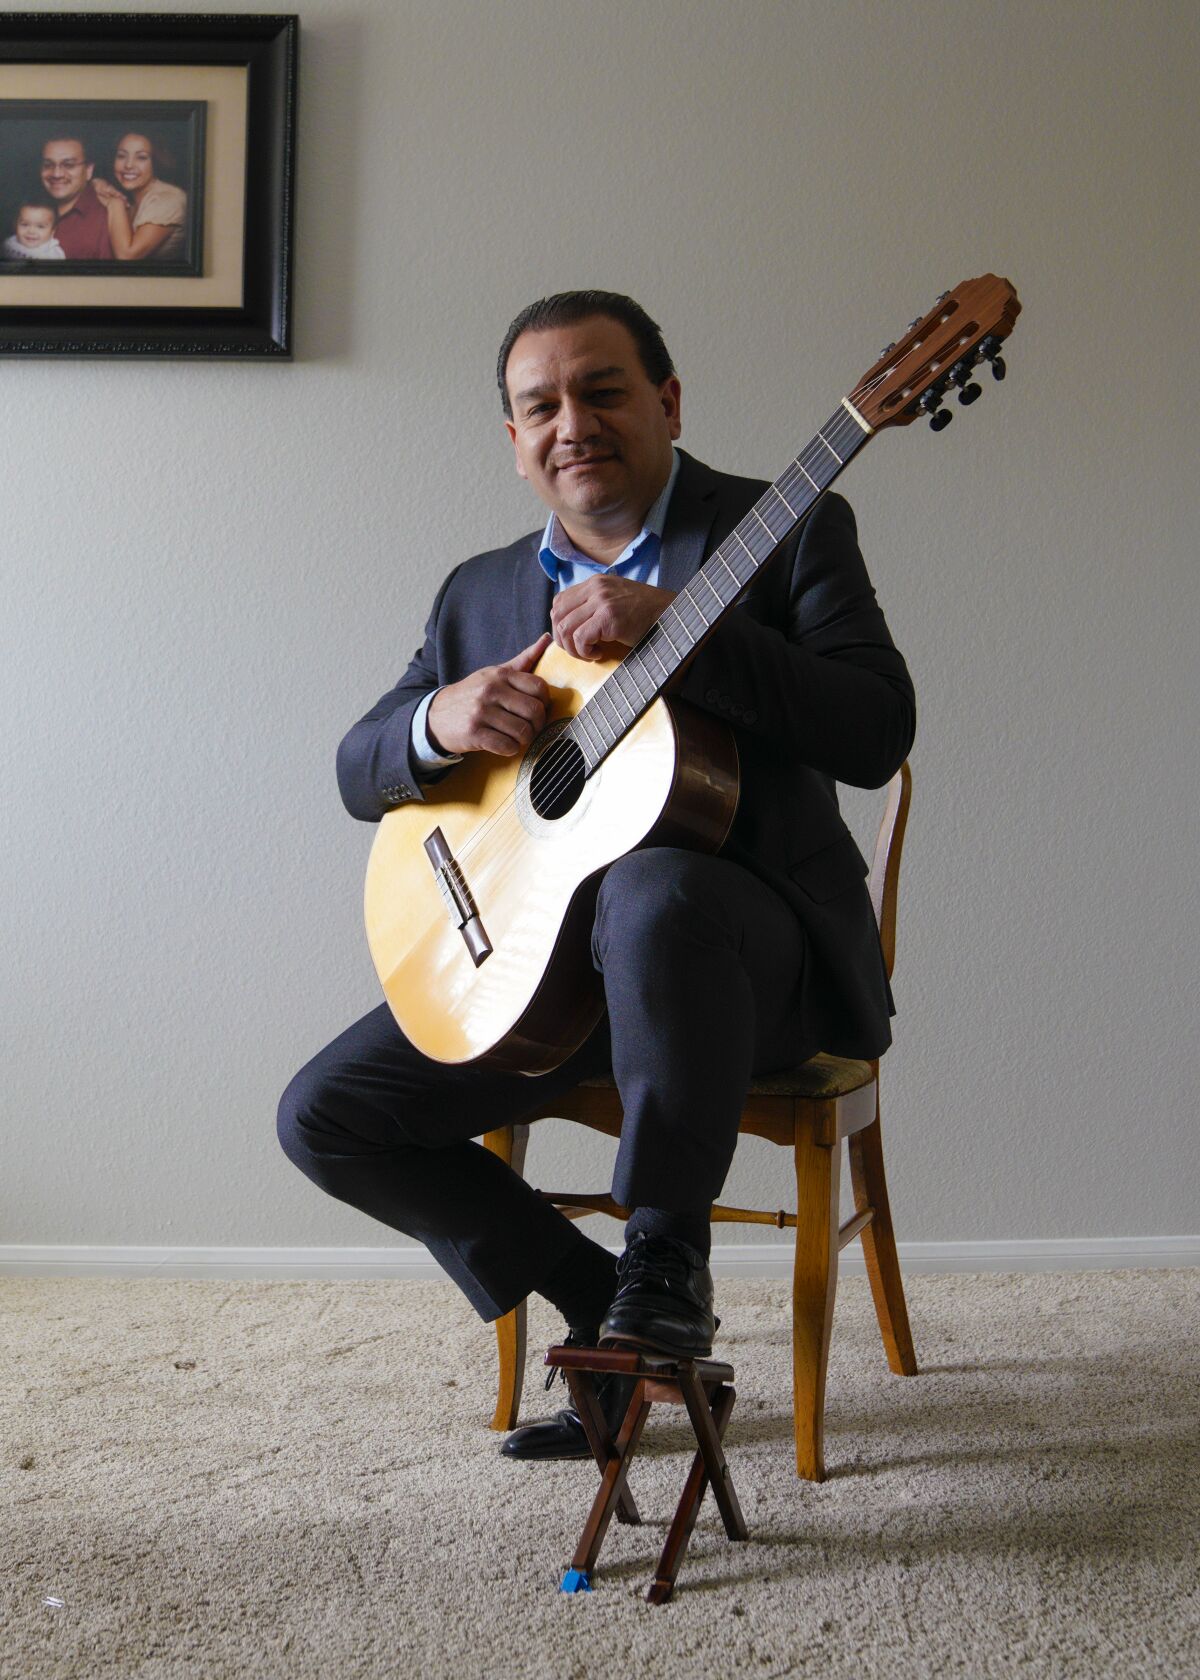 Serafin Paredes was recently named one of two recipients of the San Diego Youth Symphony and Conservatory's Profiles in Music Education Awards. He's been teaching music in the San Diego Unified School District since 1999, in addition to teaching string instruments at La Jolla Music Society's Community Music Center, developing a music program at Memorial Preparatory Academy for Scholars and Athletes, founding Mariachi Juvenil de San Diego, and serving as mariachi director at the University of San Diego.